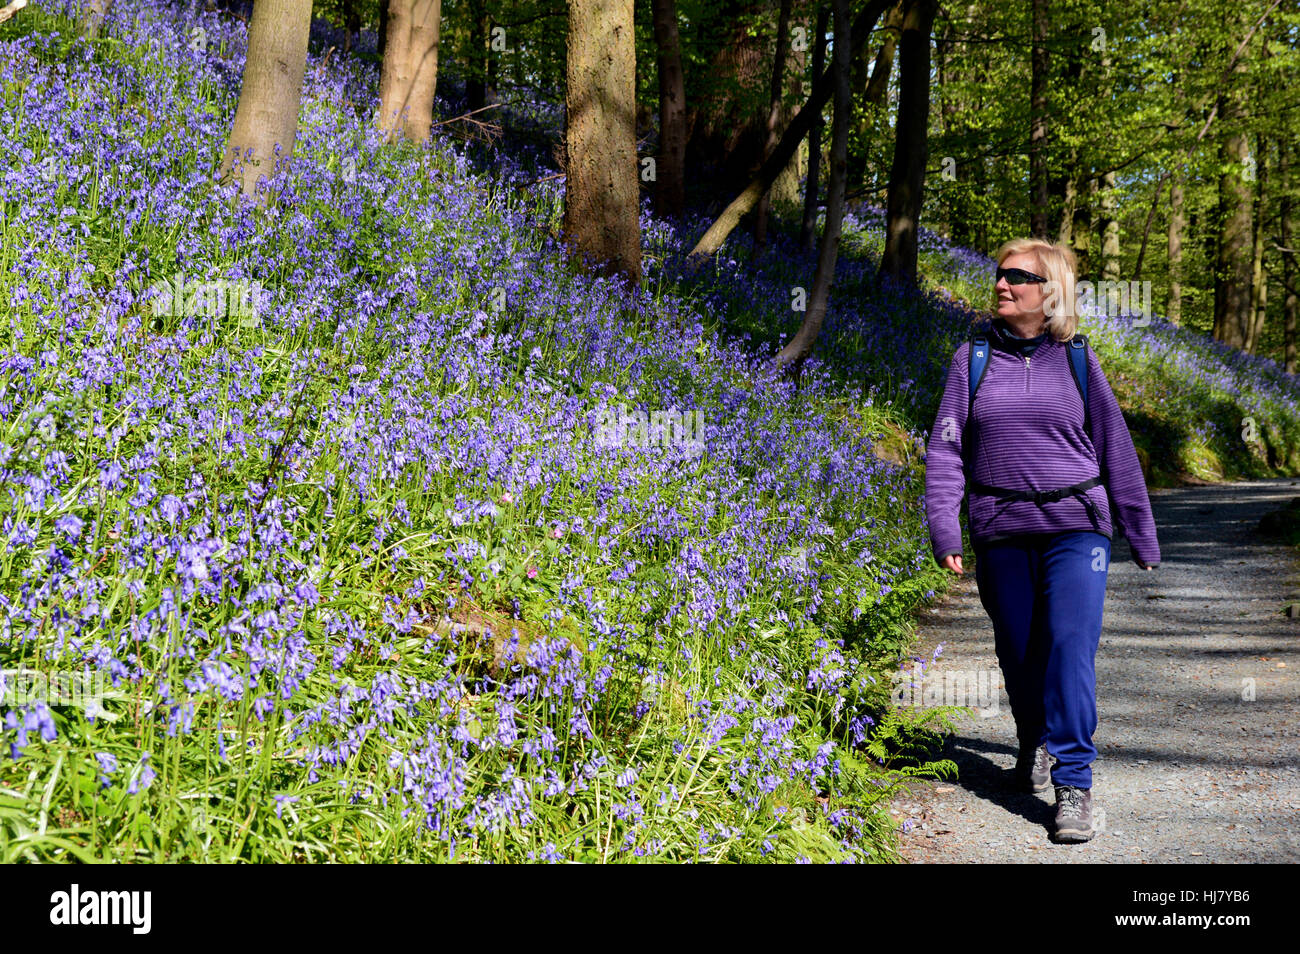 Solitary Lady Walking through Bluebells in Strid Wood part of the Dales Way Long Distance Footpath Wharfedale, Yorkshire Dales National Park, UK Stock Photo